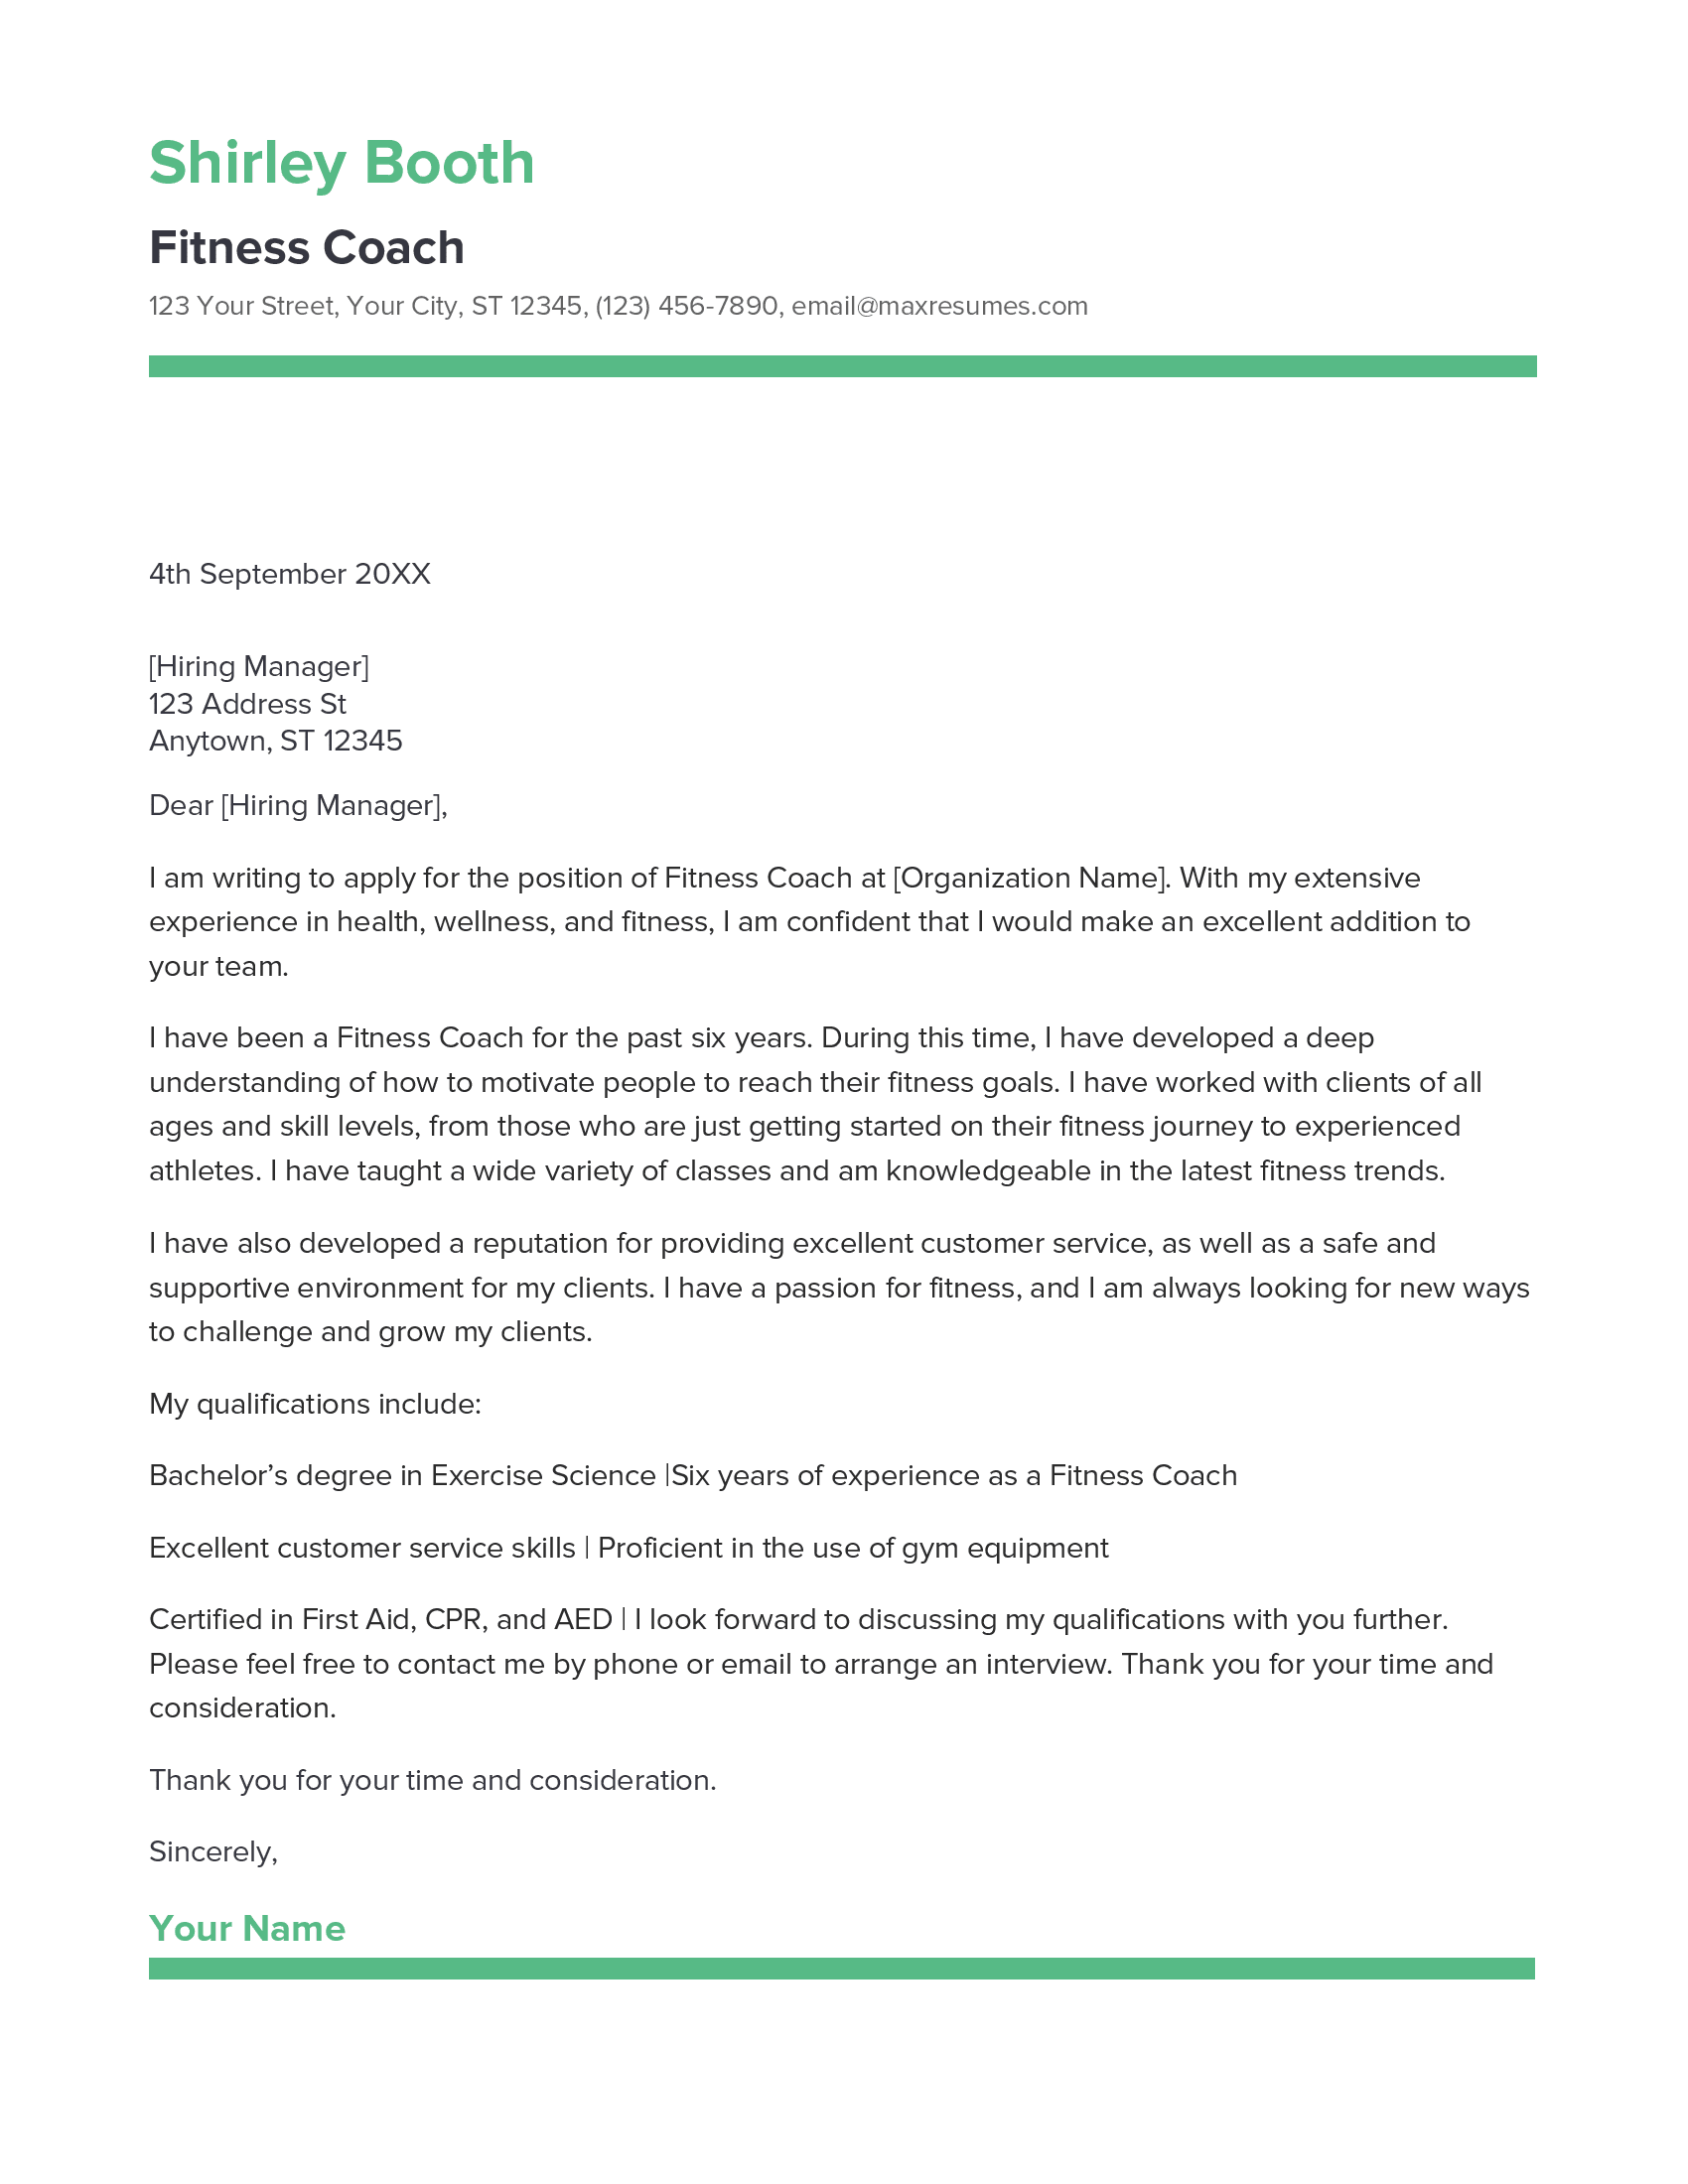 Fitness Coach Cover Letter Example